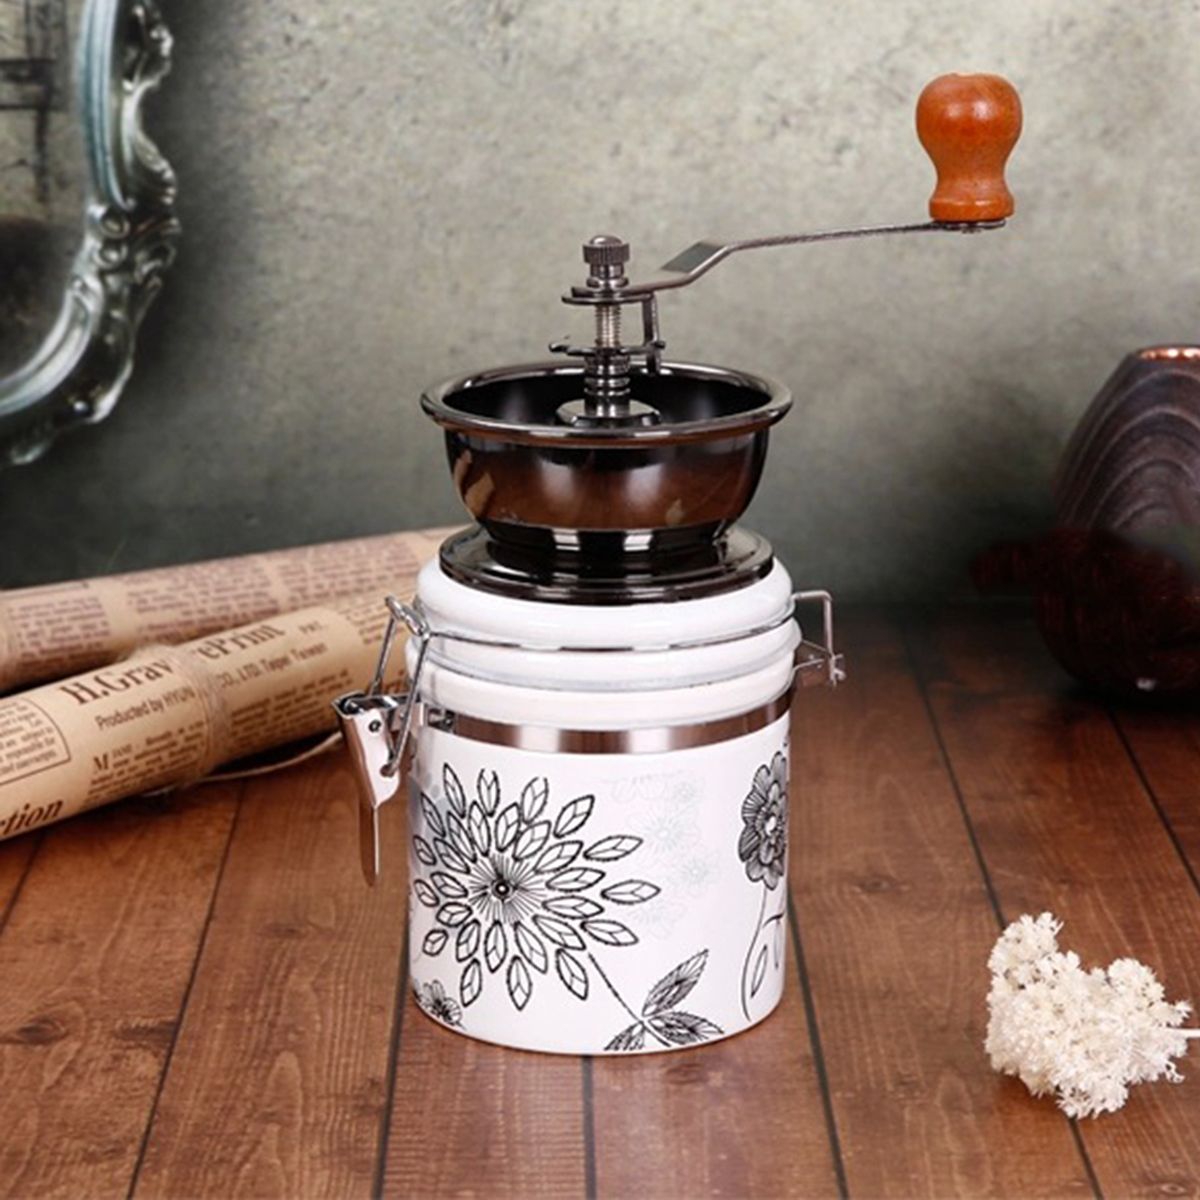 Manual-Coffee-Grinder-Portable-Hand-Crank-Stainless-Steel-Ceramic-Coffee-Mill-1572034